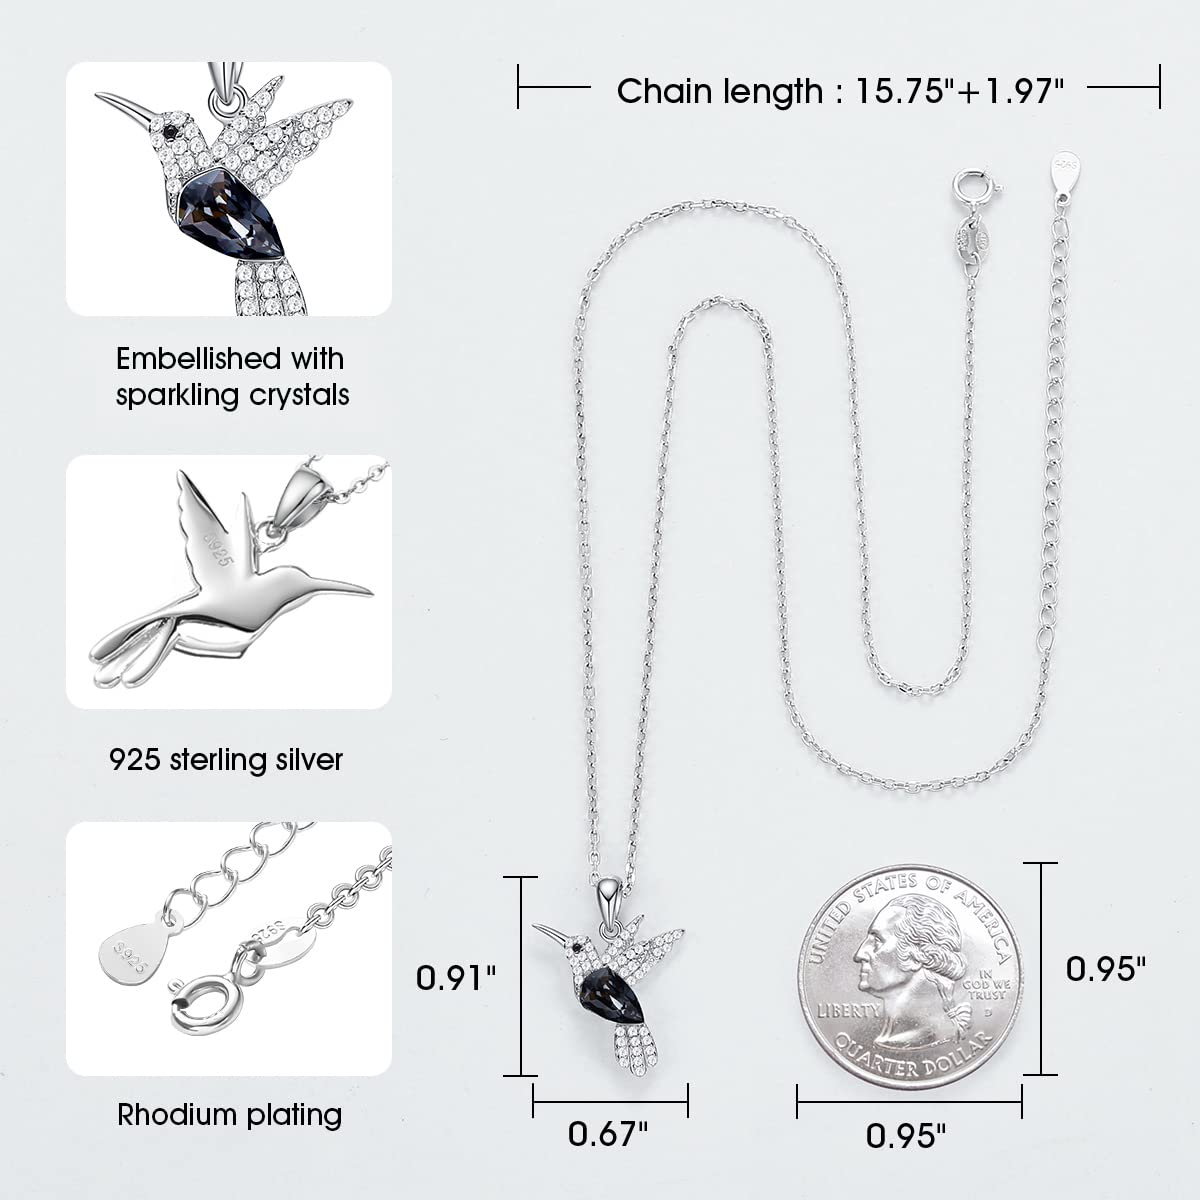 CDE Christmas Mother's Day Valentine’s Day Necklace Gifts for Women Hummingbird Necklaces S925 Sterling Silver Necklaces for Women Embellished with Crystals from Austria Birthday Jewelry Gifts for Wife Animal Necklace for Girlfriend Mom